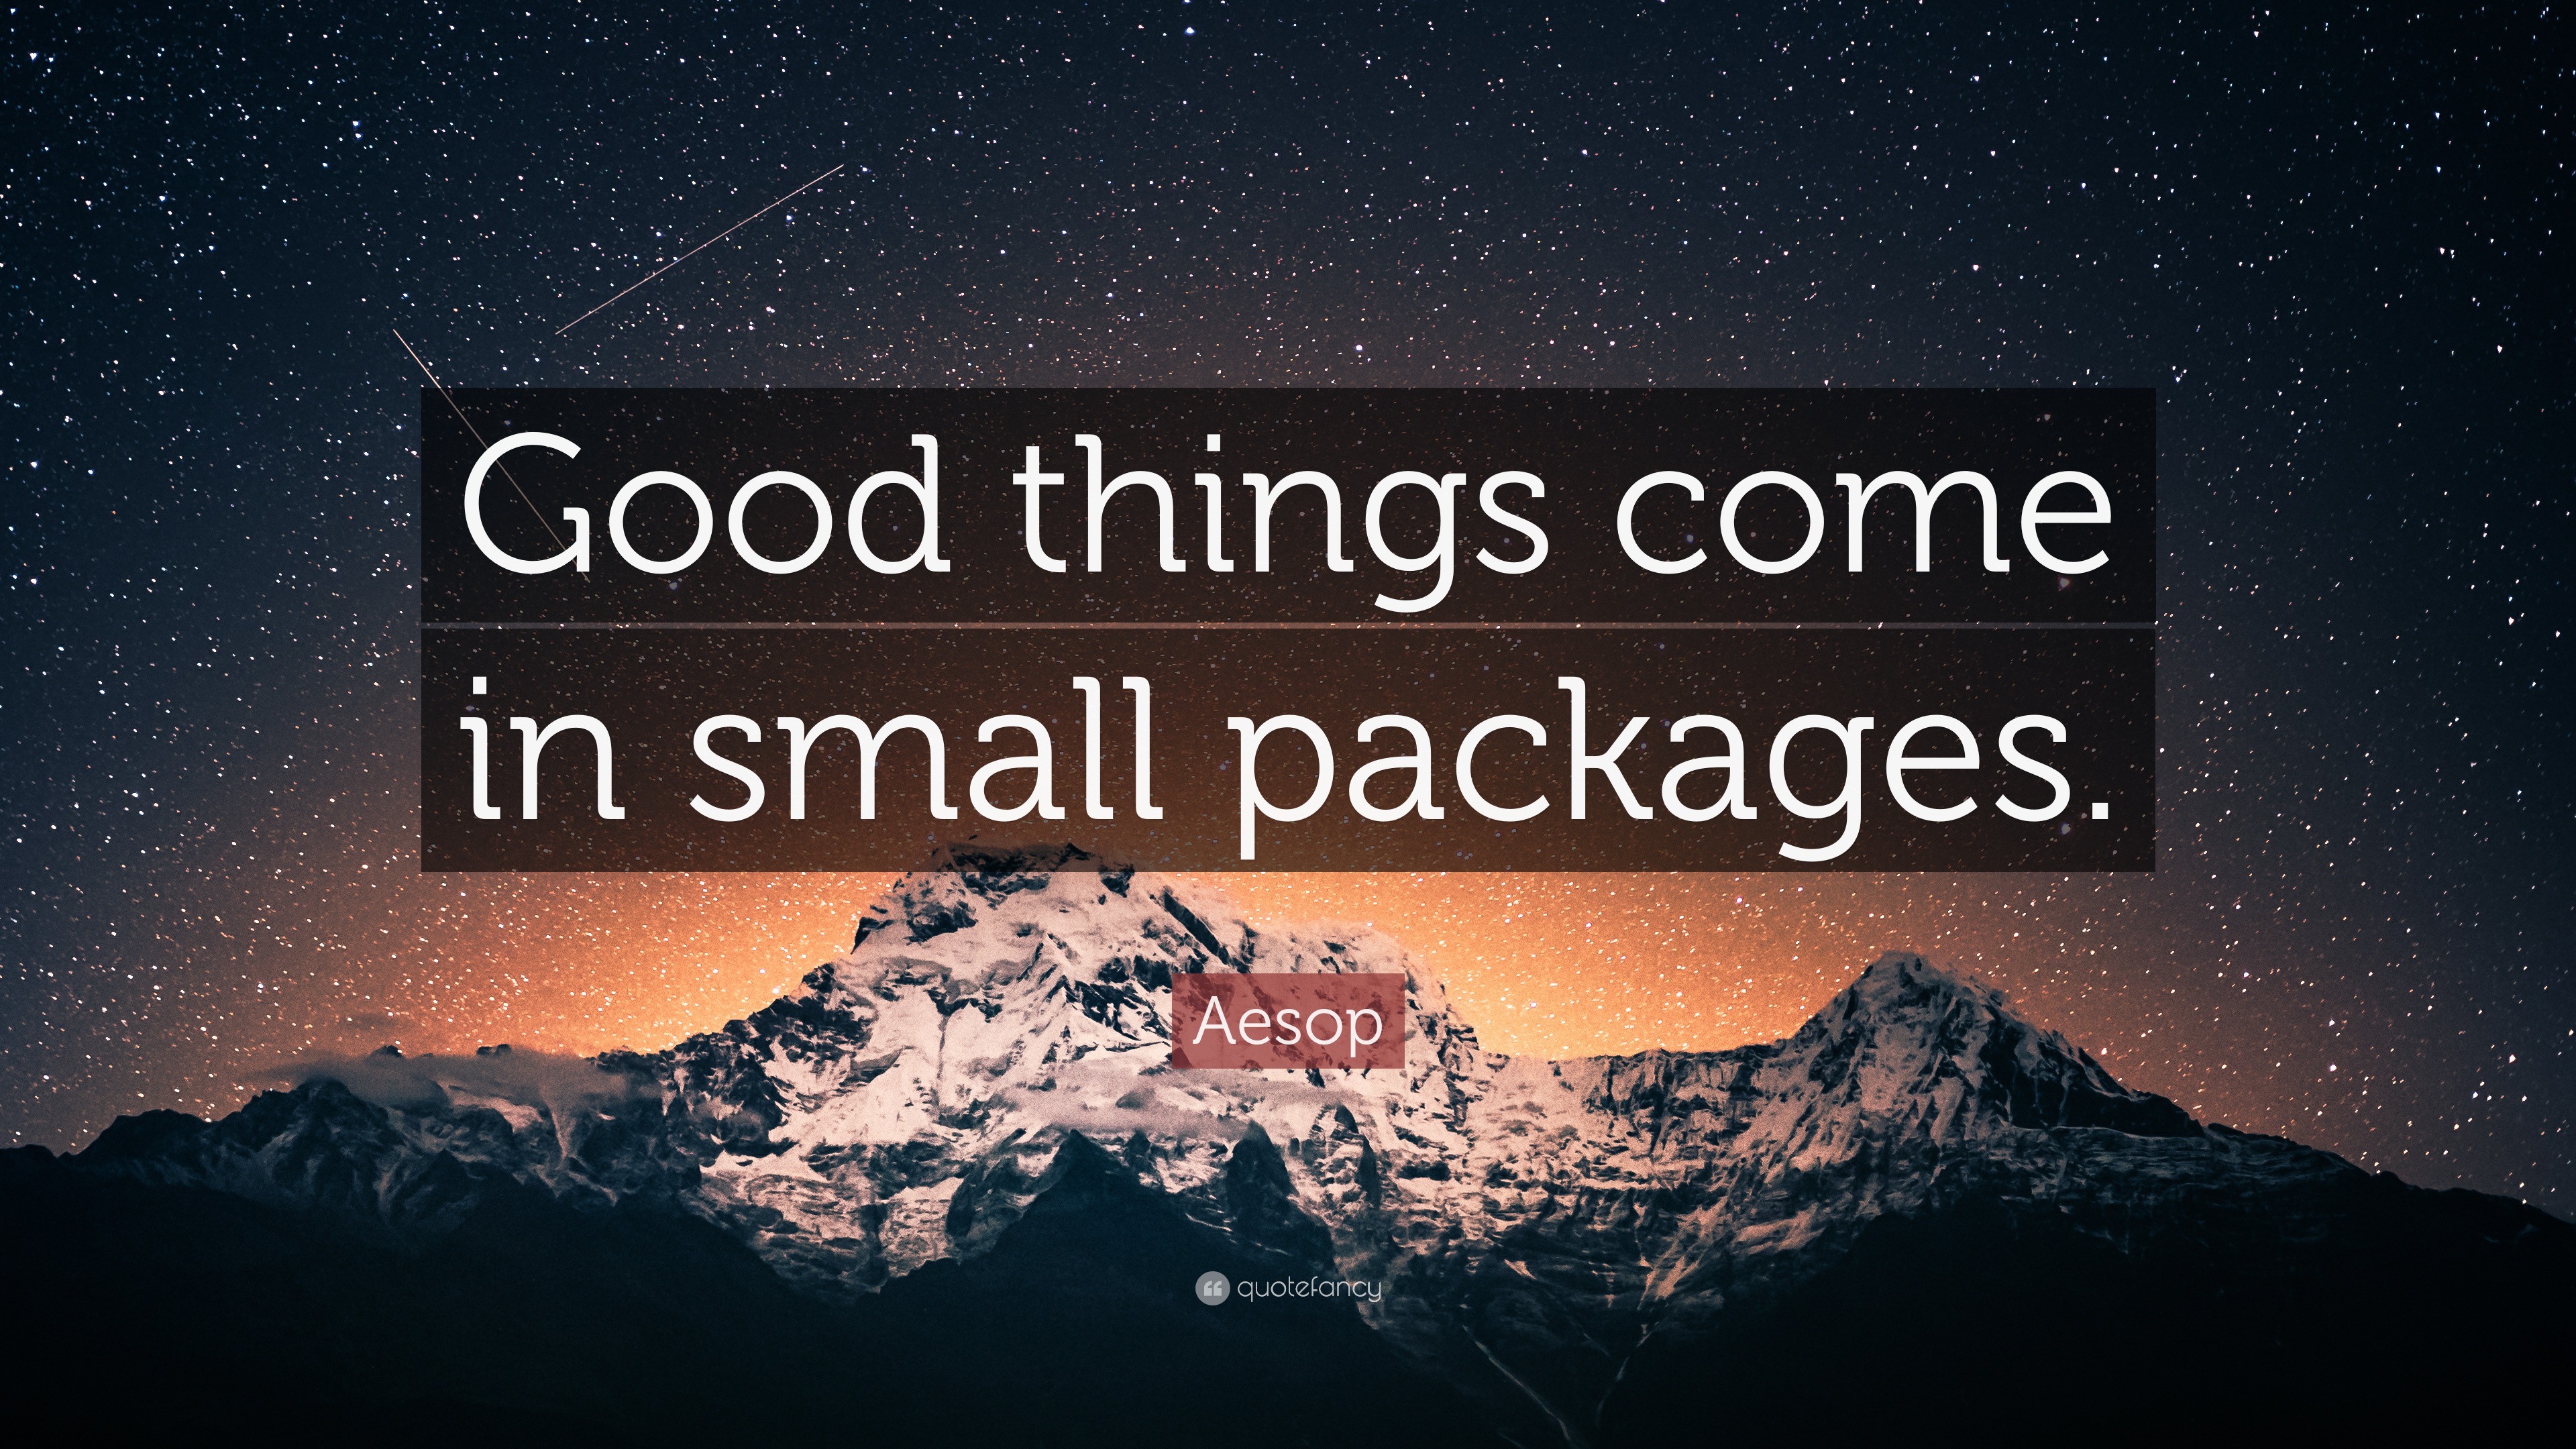 https://quotefancy.com/media/wallpaper/3840x2160/2108875-Aesop-Quote-Good-things-come-in-small-packages.jpg